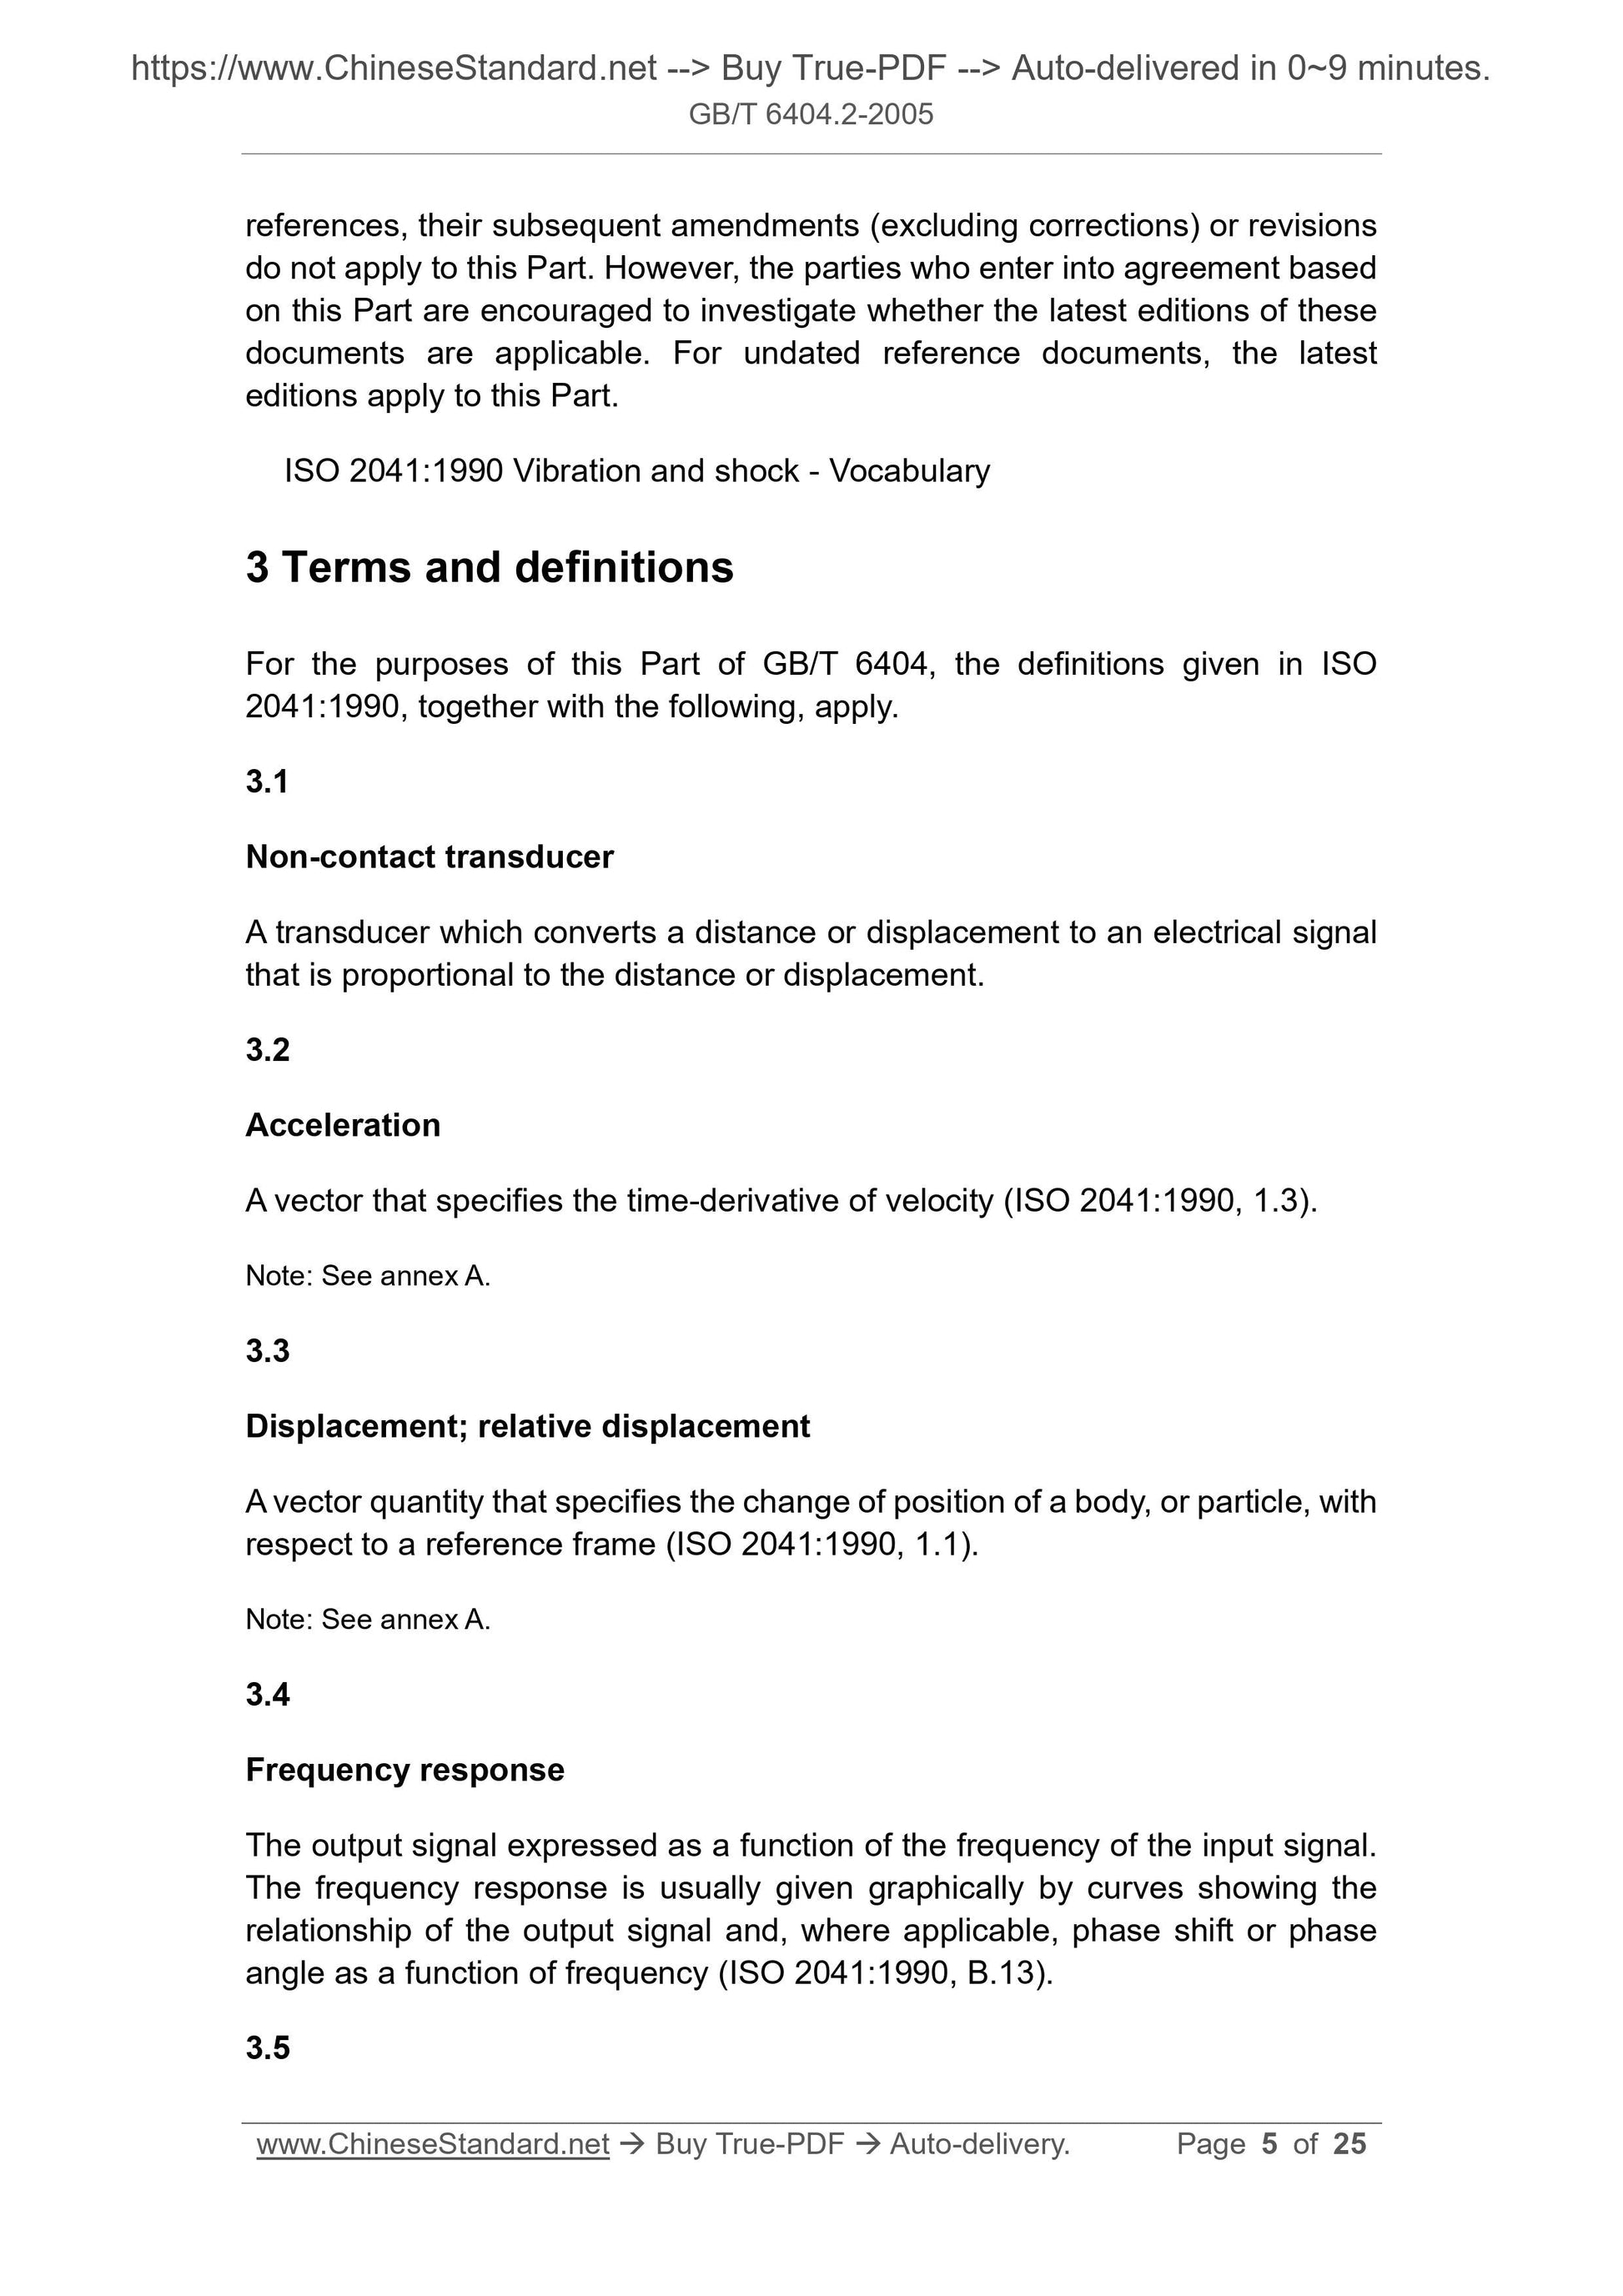 GB/T 6404.2-2005 Page 5